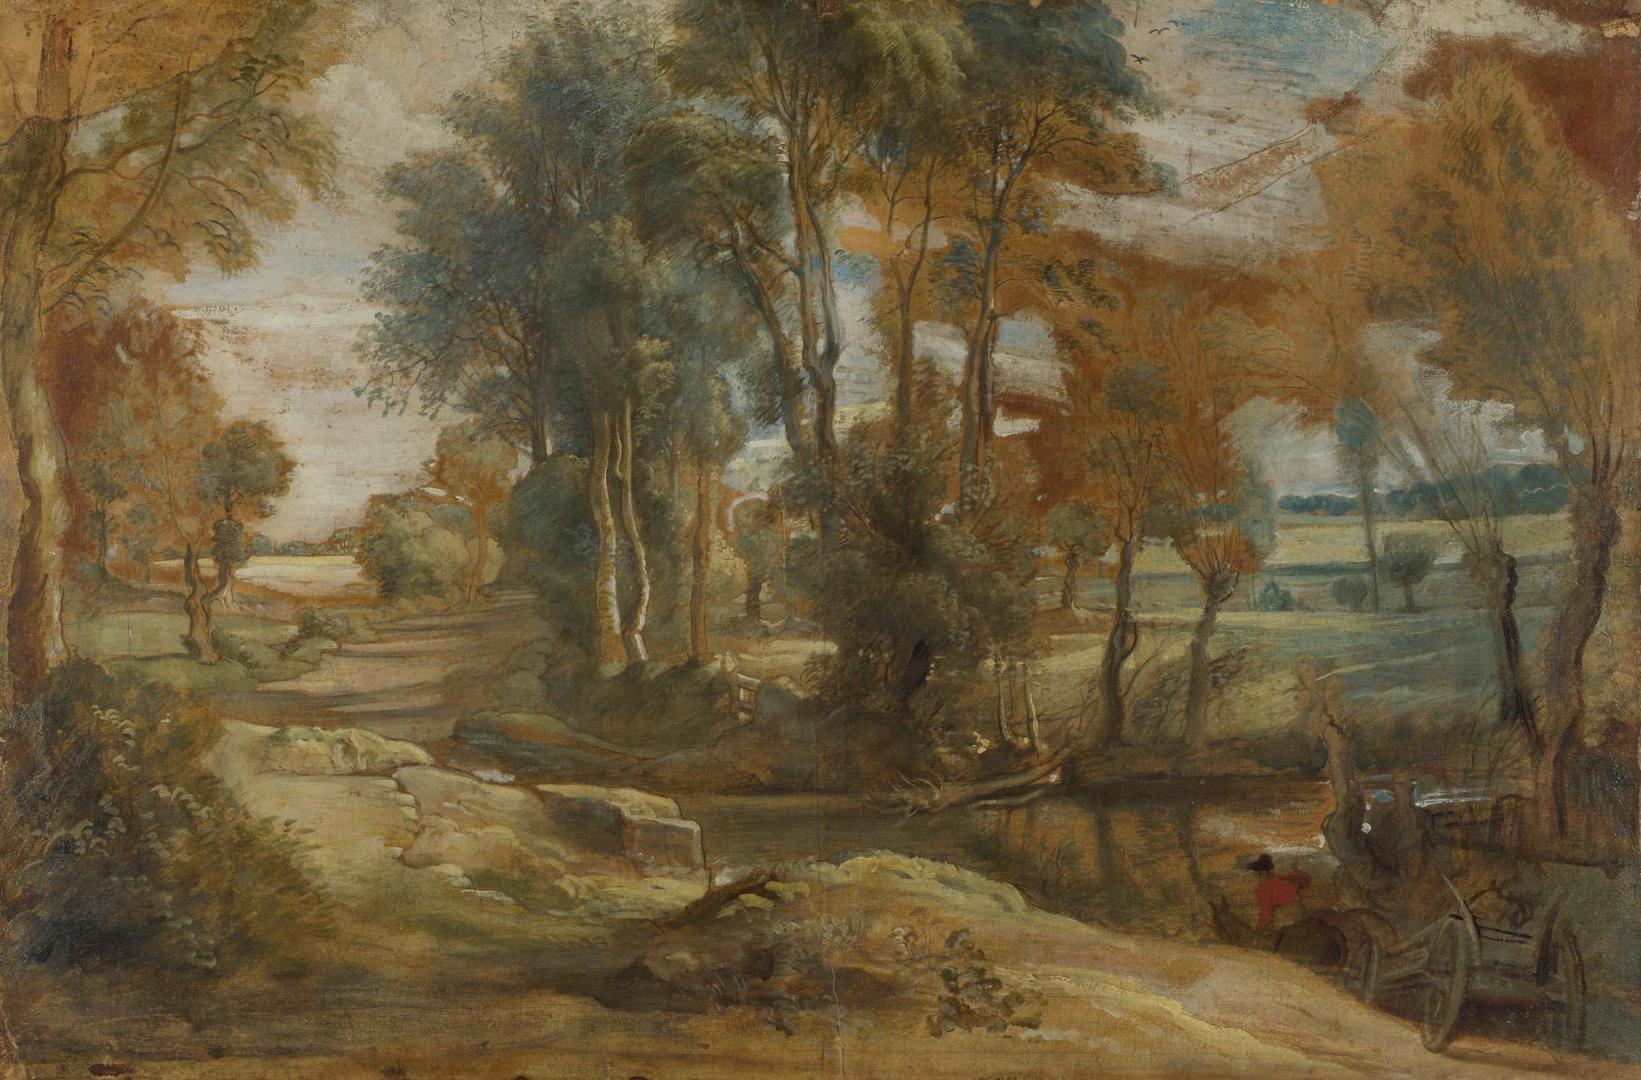 A Wagon fording a Stream by Peter Paul Rubens